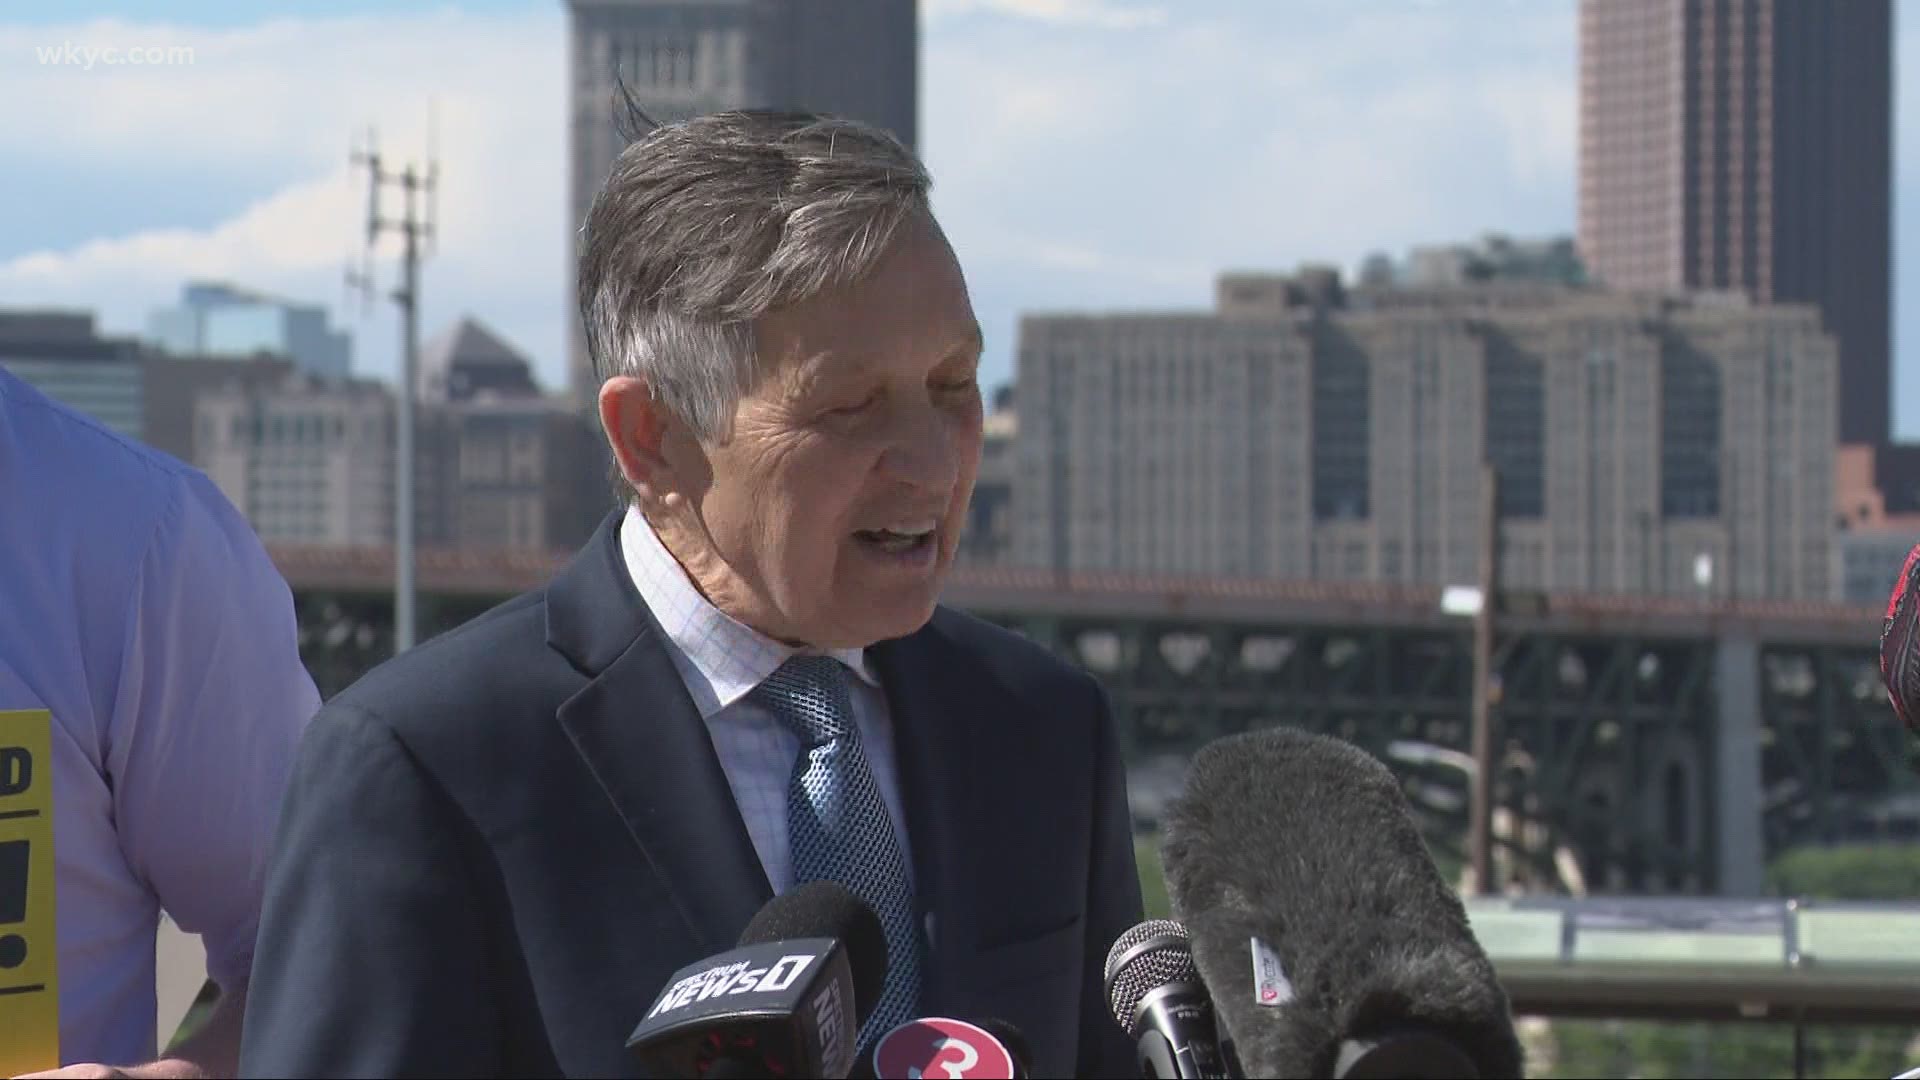 Among Kucinich's proposals are hiring 400 new police officers and purchasing two new police helicopters to assist in chasing felons. Lynna Lai reports.